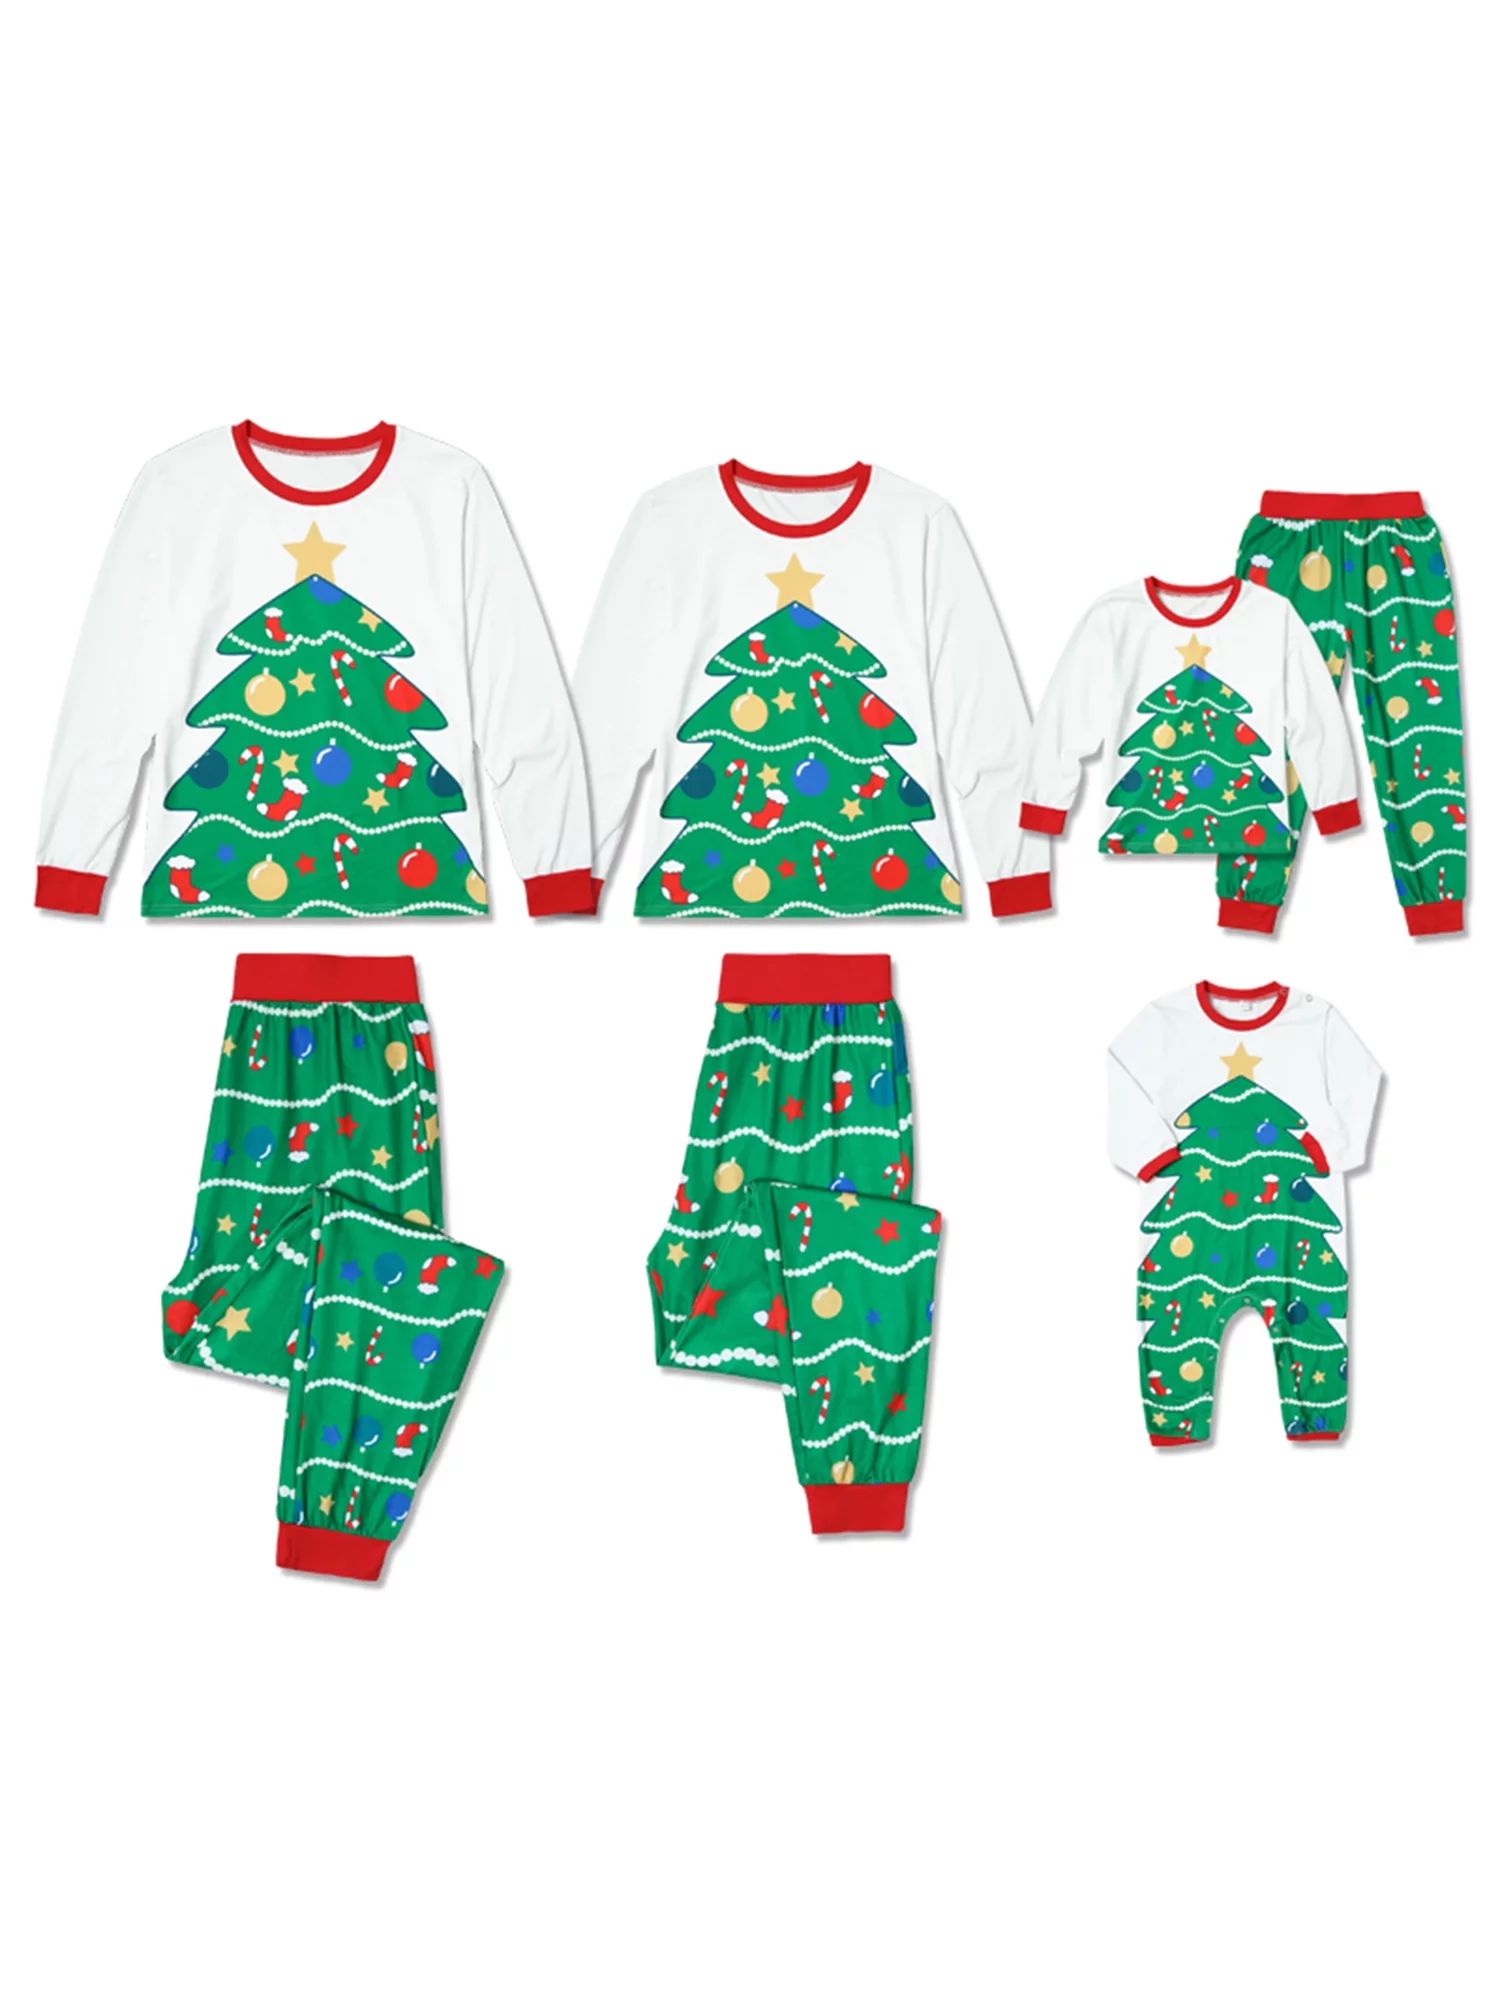 PatPat Christmas Trees Family Matching Pajamas for Family,Sizes Baby-Adult,2-piece,Green/White,Un... | Walmart (US)